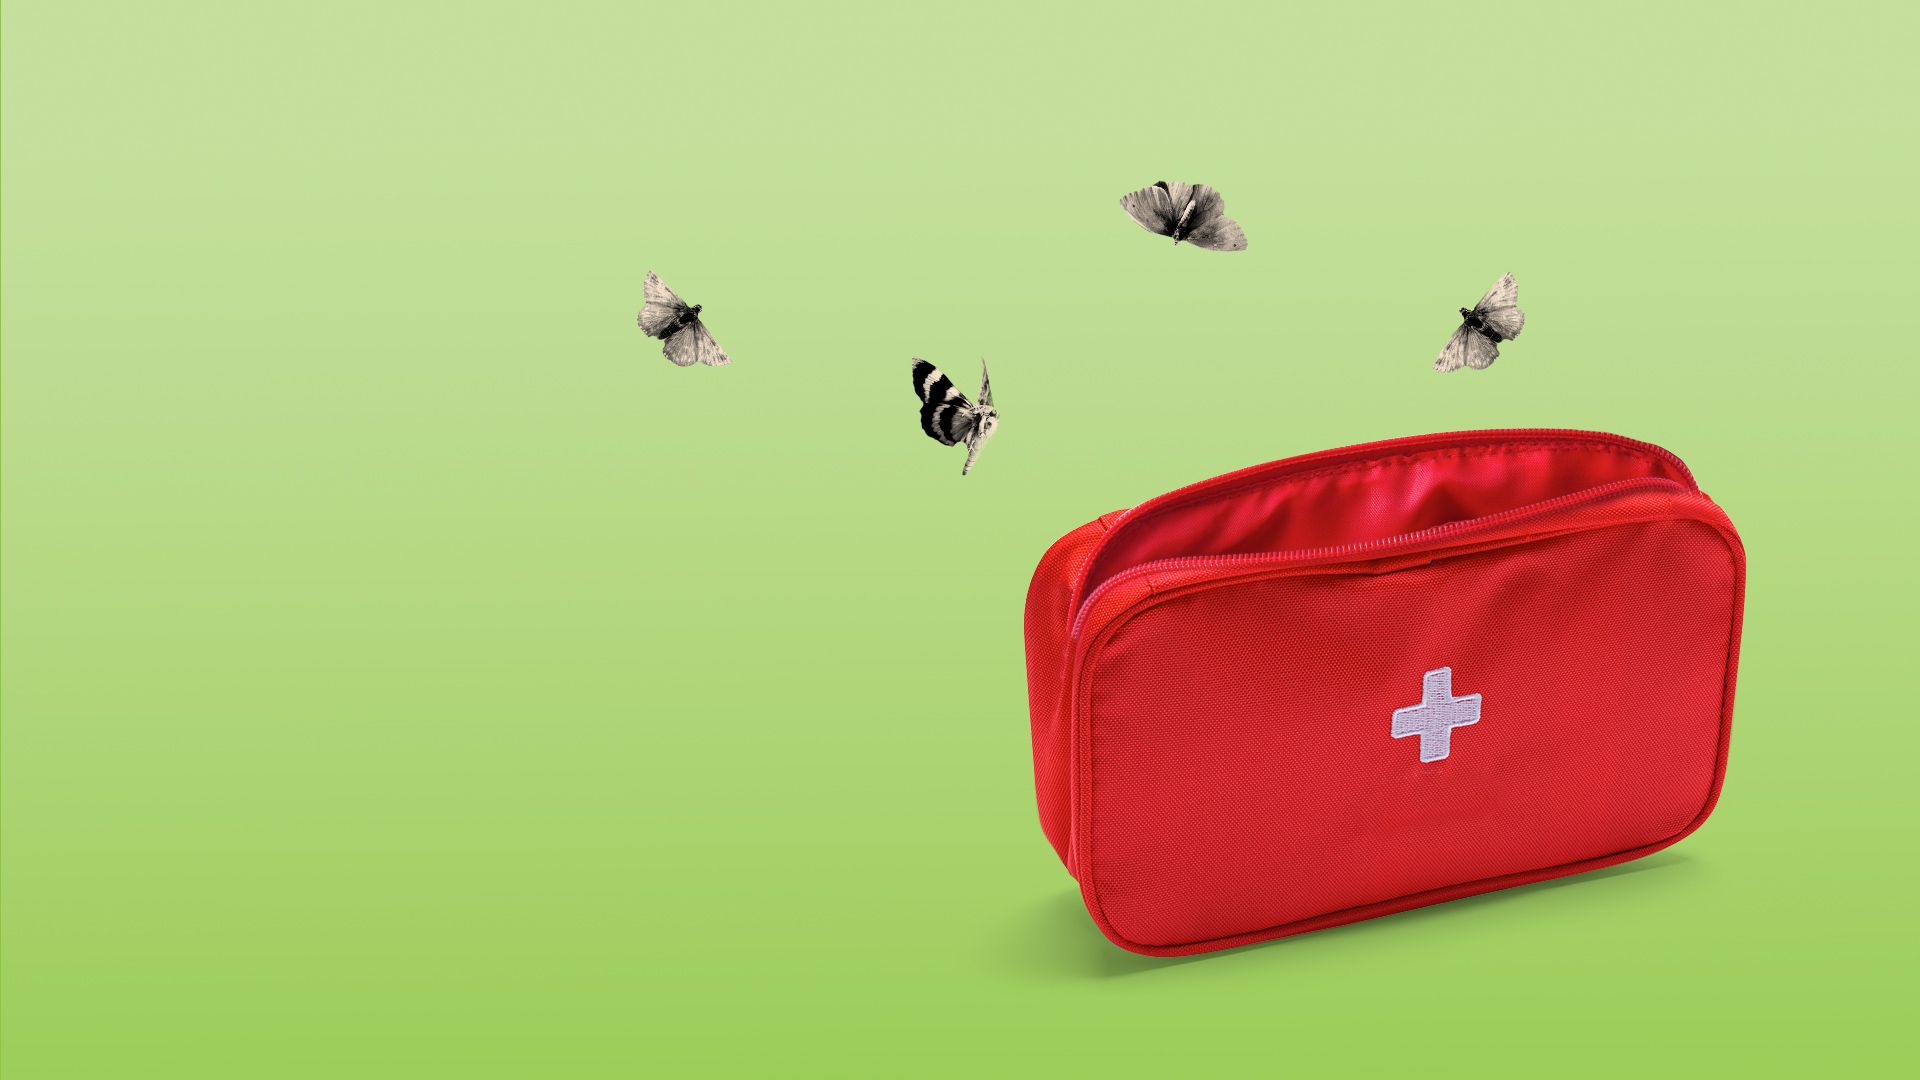 Illustration of a first aid bag with moths flying out.